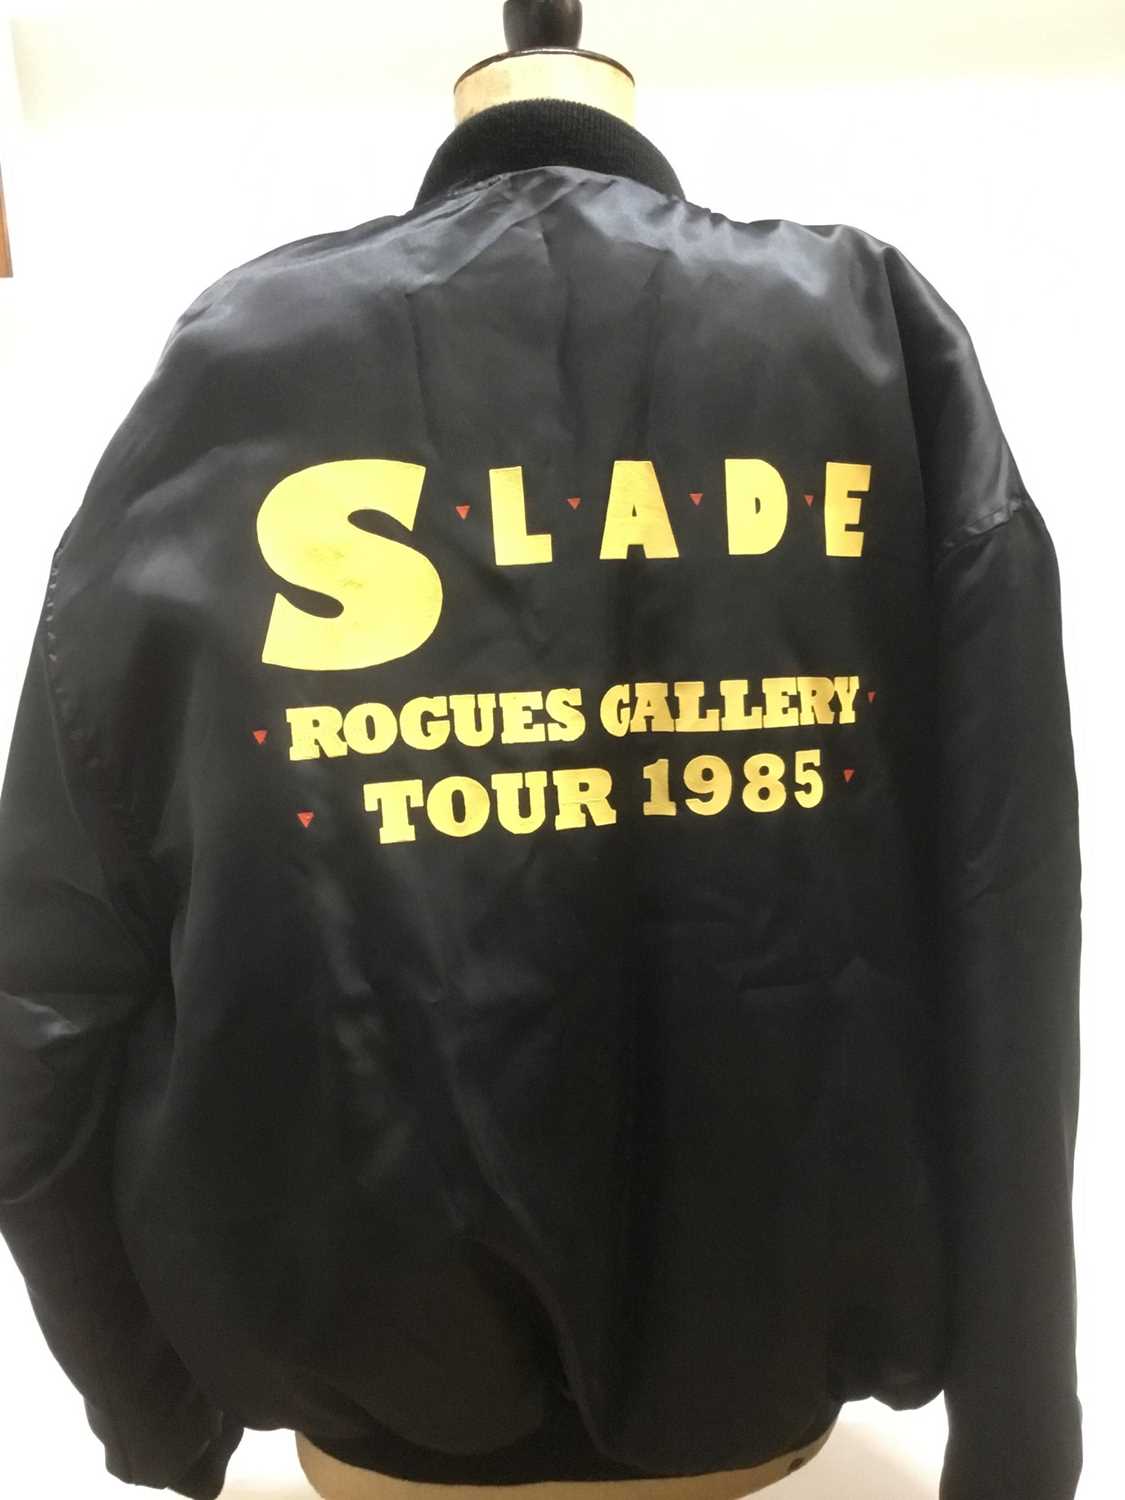 It’s Christmas! - Slade jacket gifted by the band